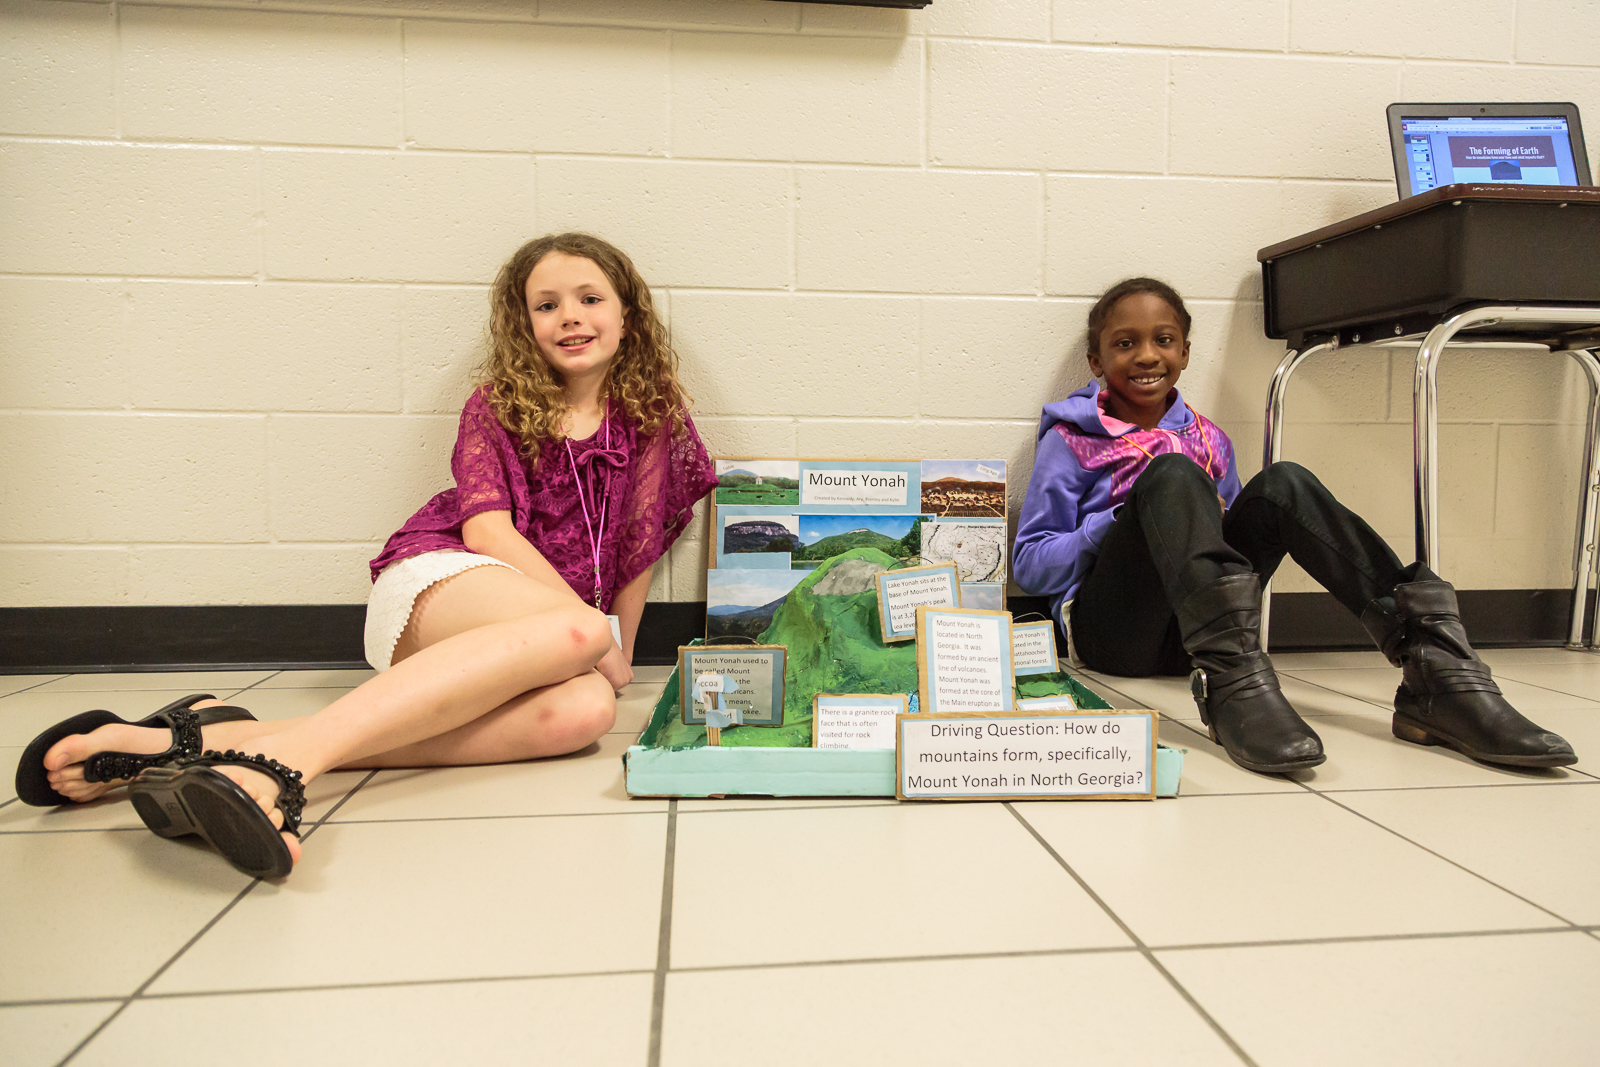   Mountain formation was the driving question for  Kennedy  and  Ari , 3rd graders. The two collaborated on the project, narrowing their shared focus to Mount Yonah in the nearby Northeast Georgia mountains. Kennedy says collaboration with new people